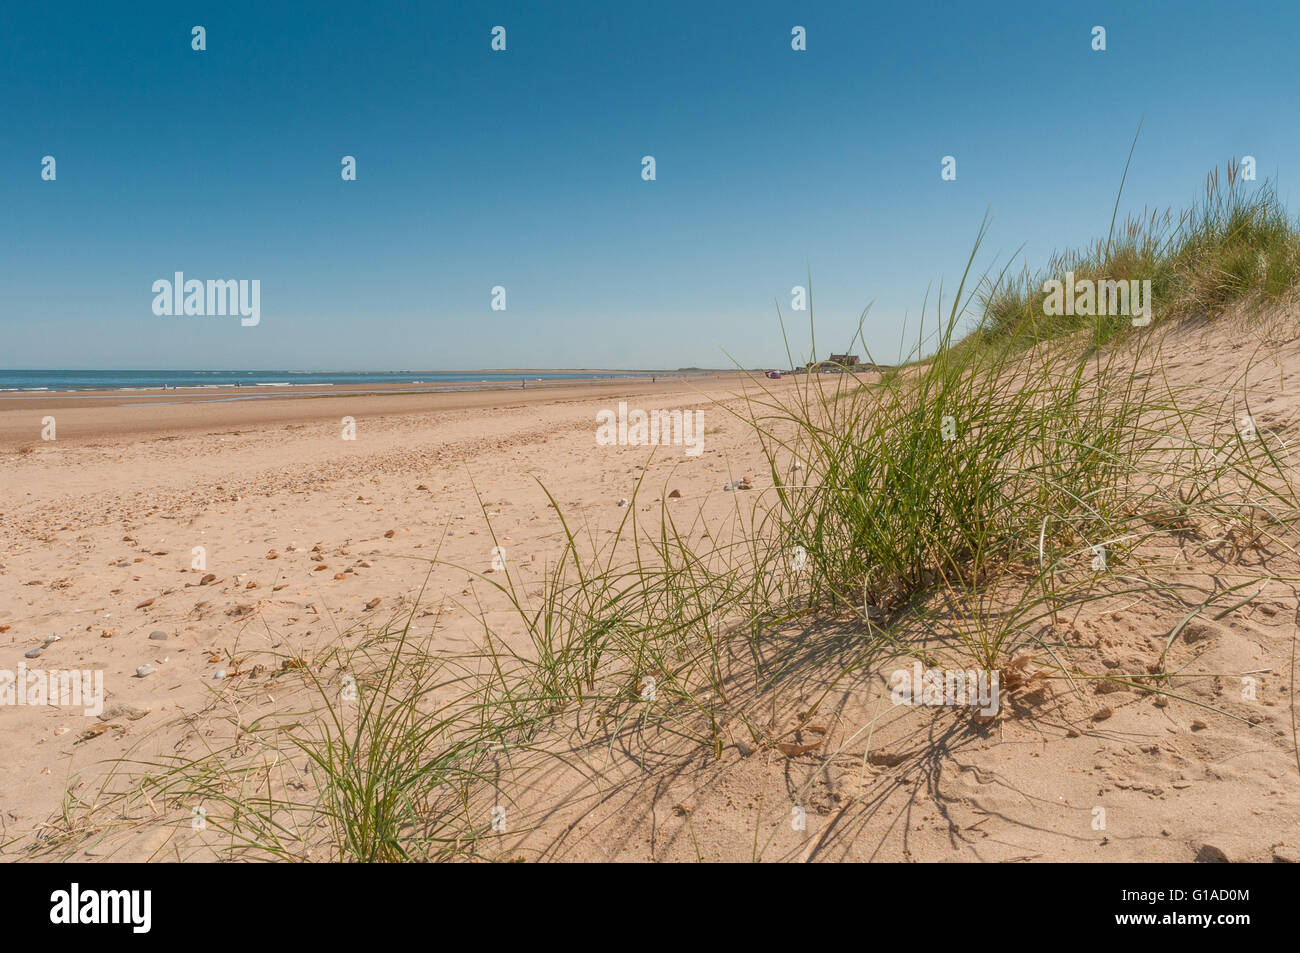 Landscape view of Brancaster beach and sand dunes on the North Norfolk coast, England Stock Photo